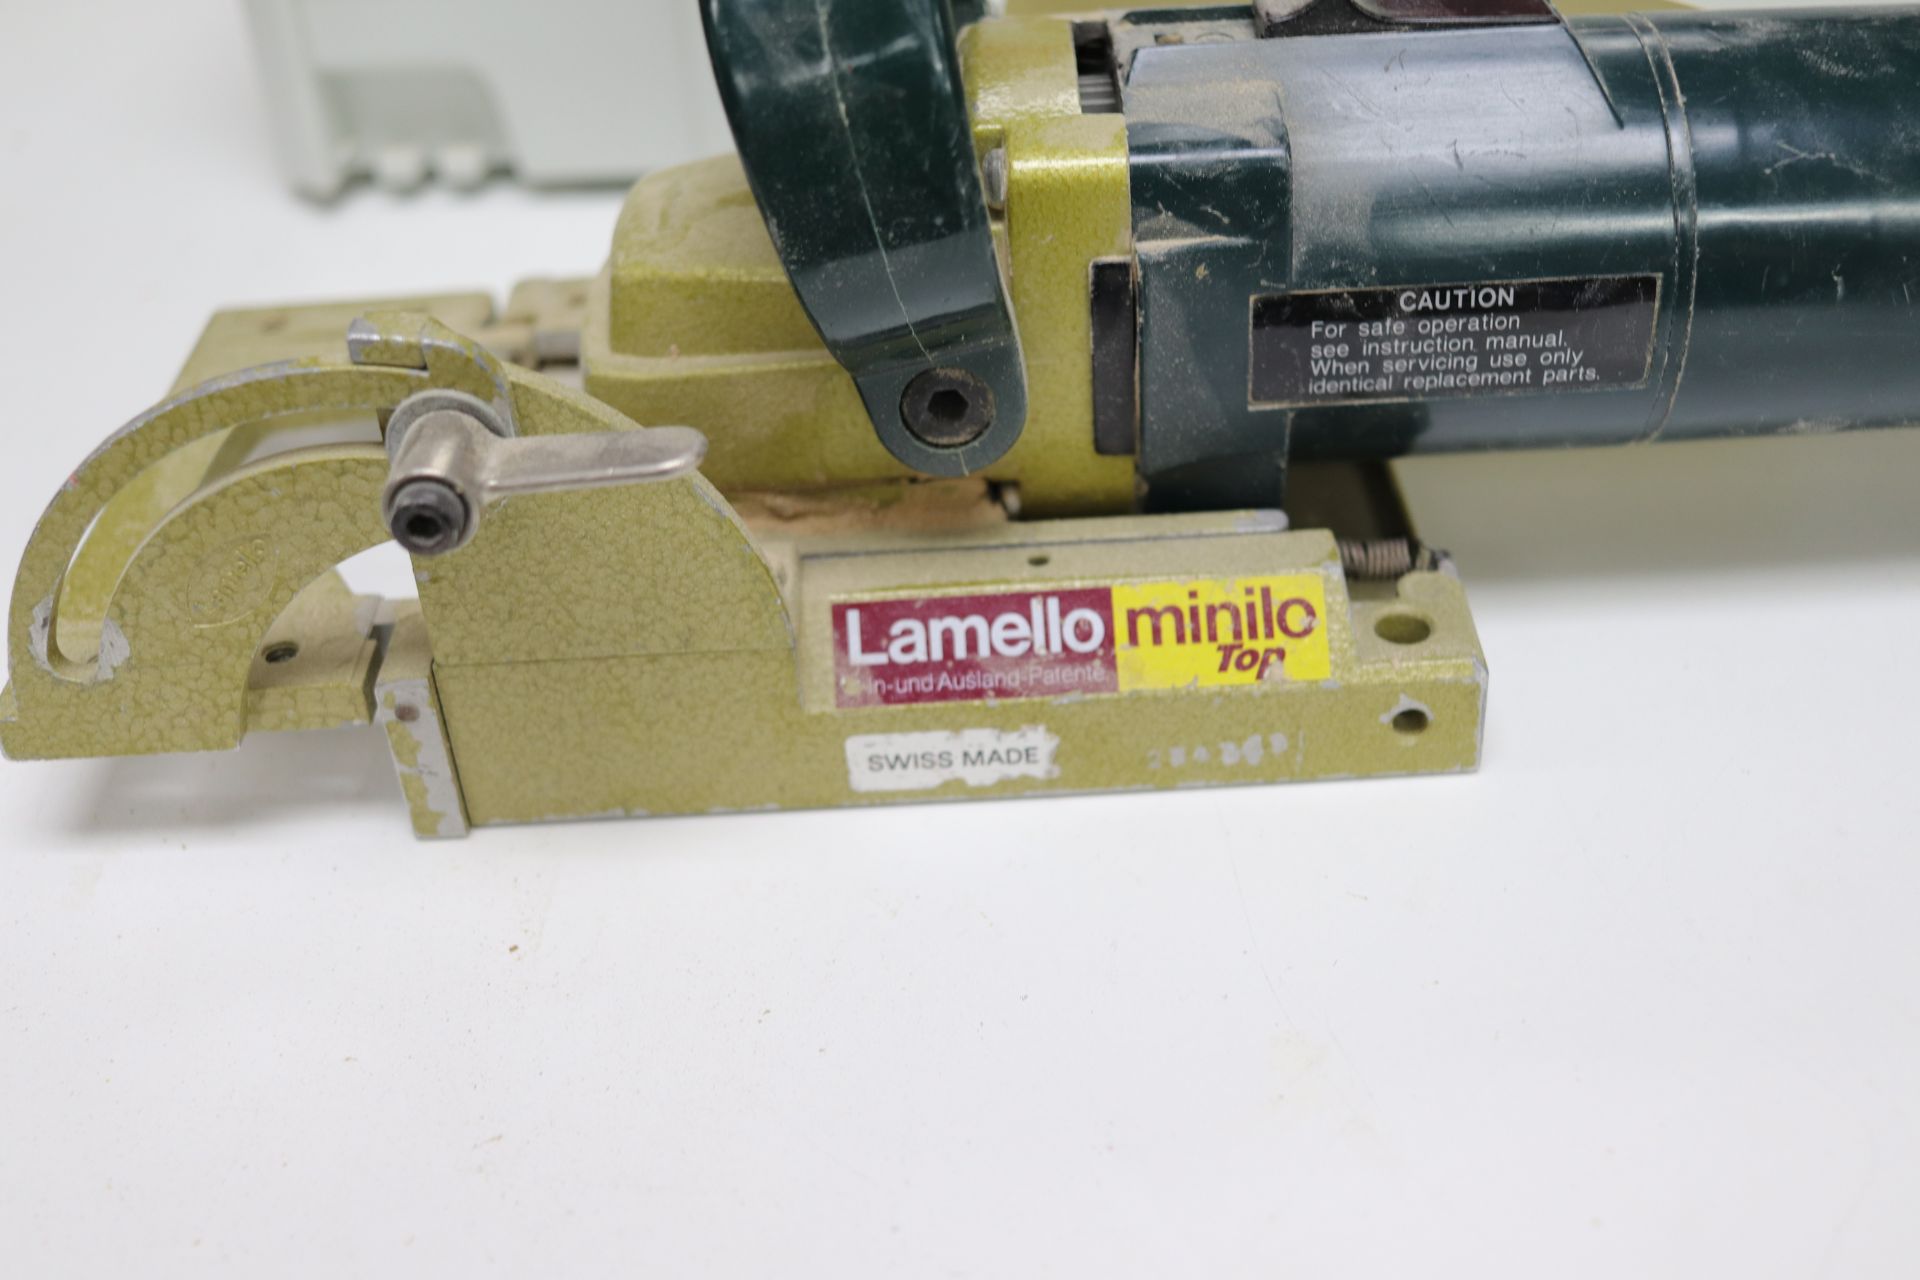 Lamello mini LC top 21 made in Switzerland, with case, #101500USMM - Image 2 of 9